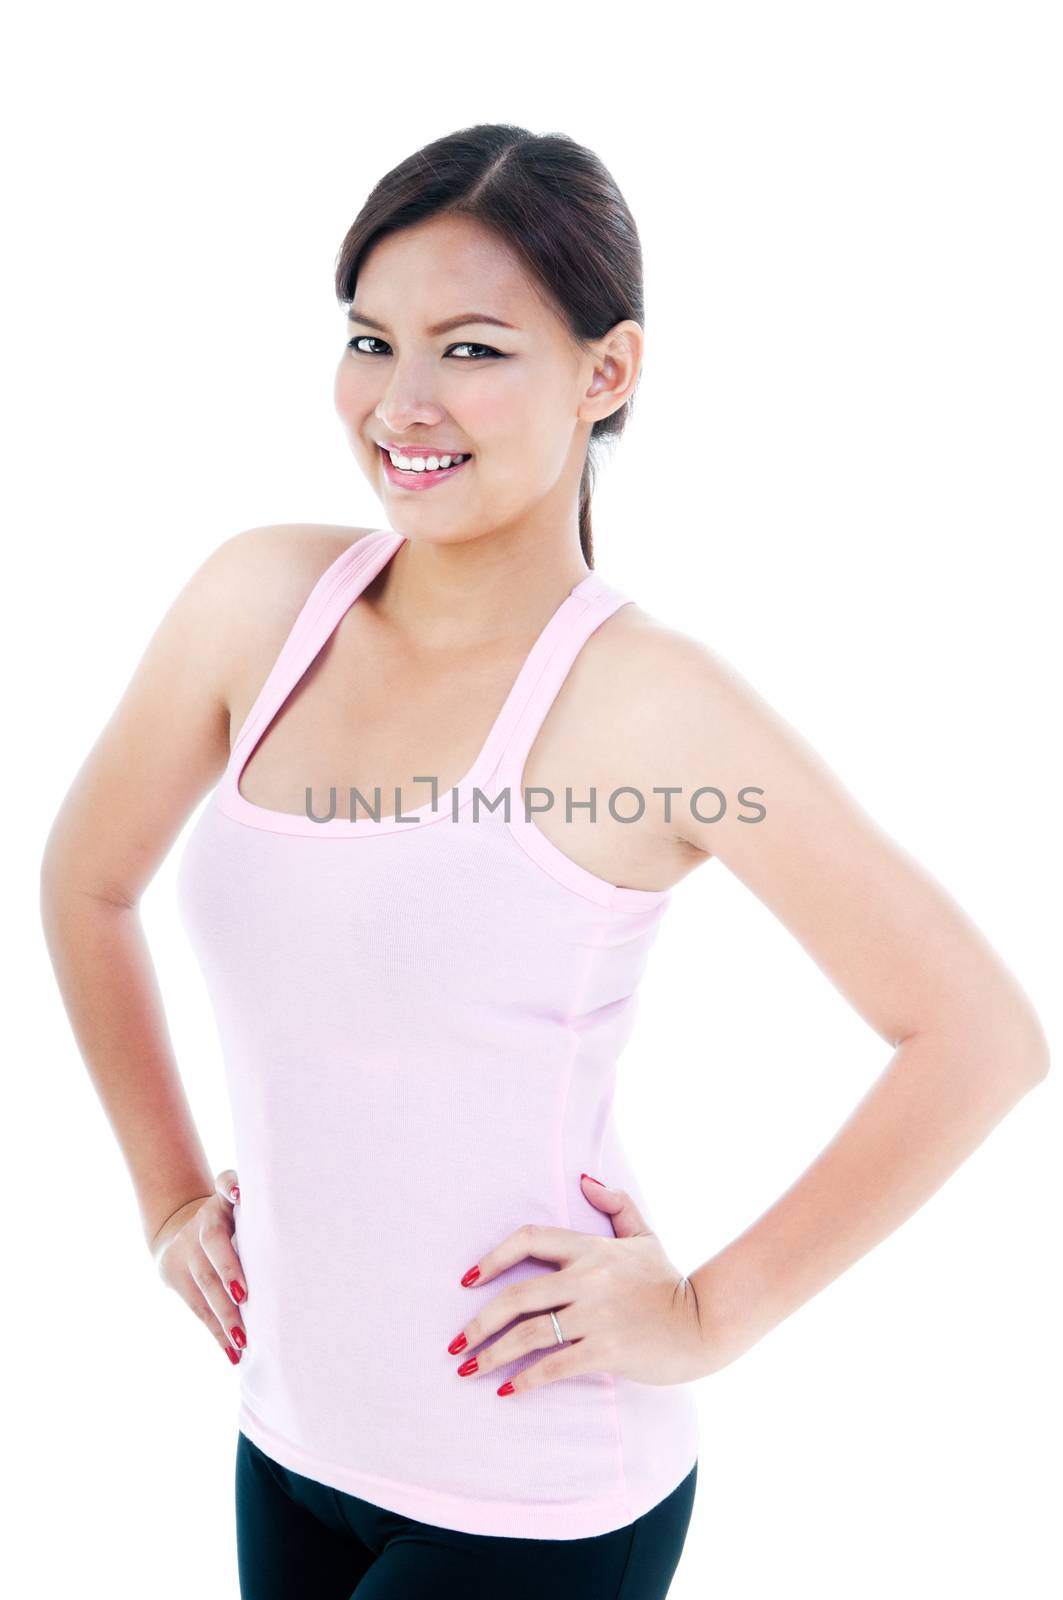 Portrait of a healthy woman with hands on hips over white background.